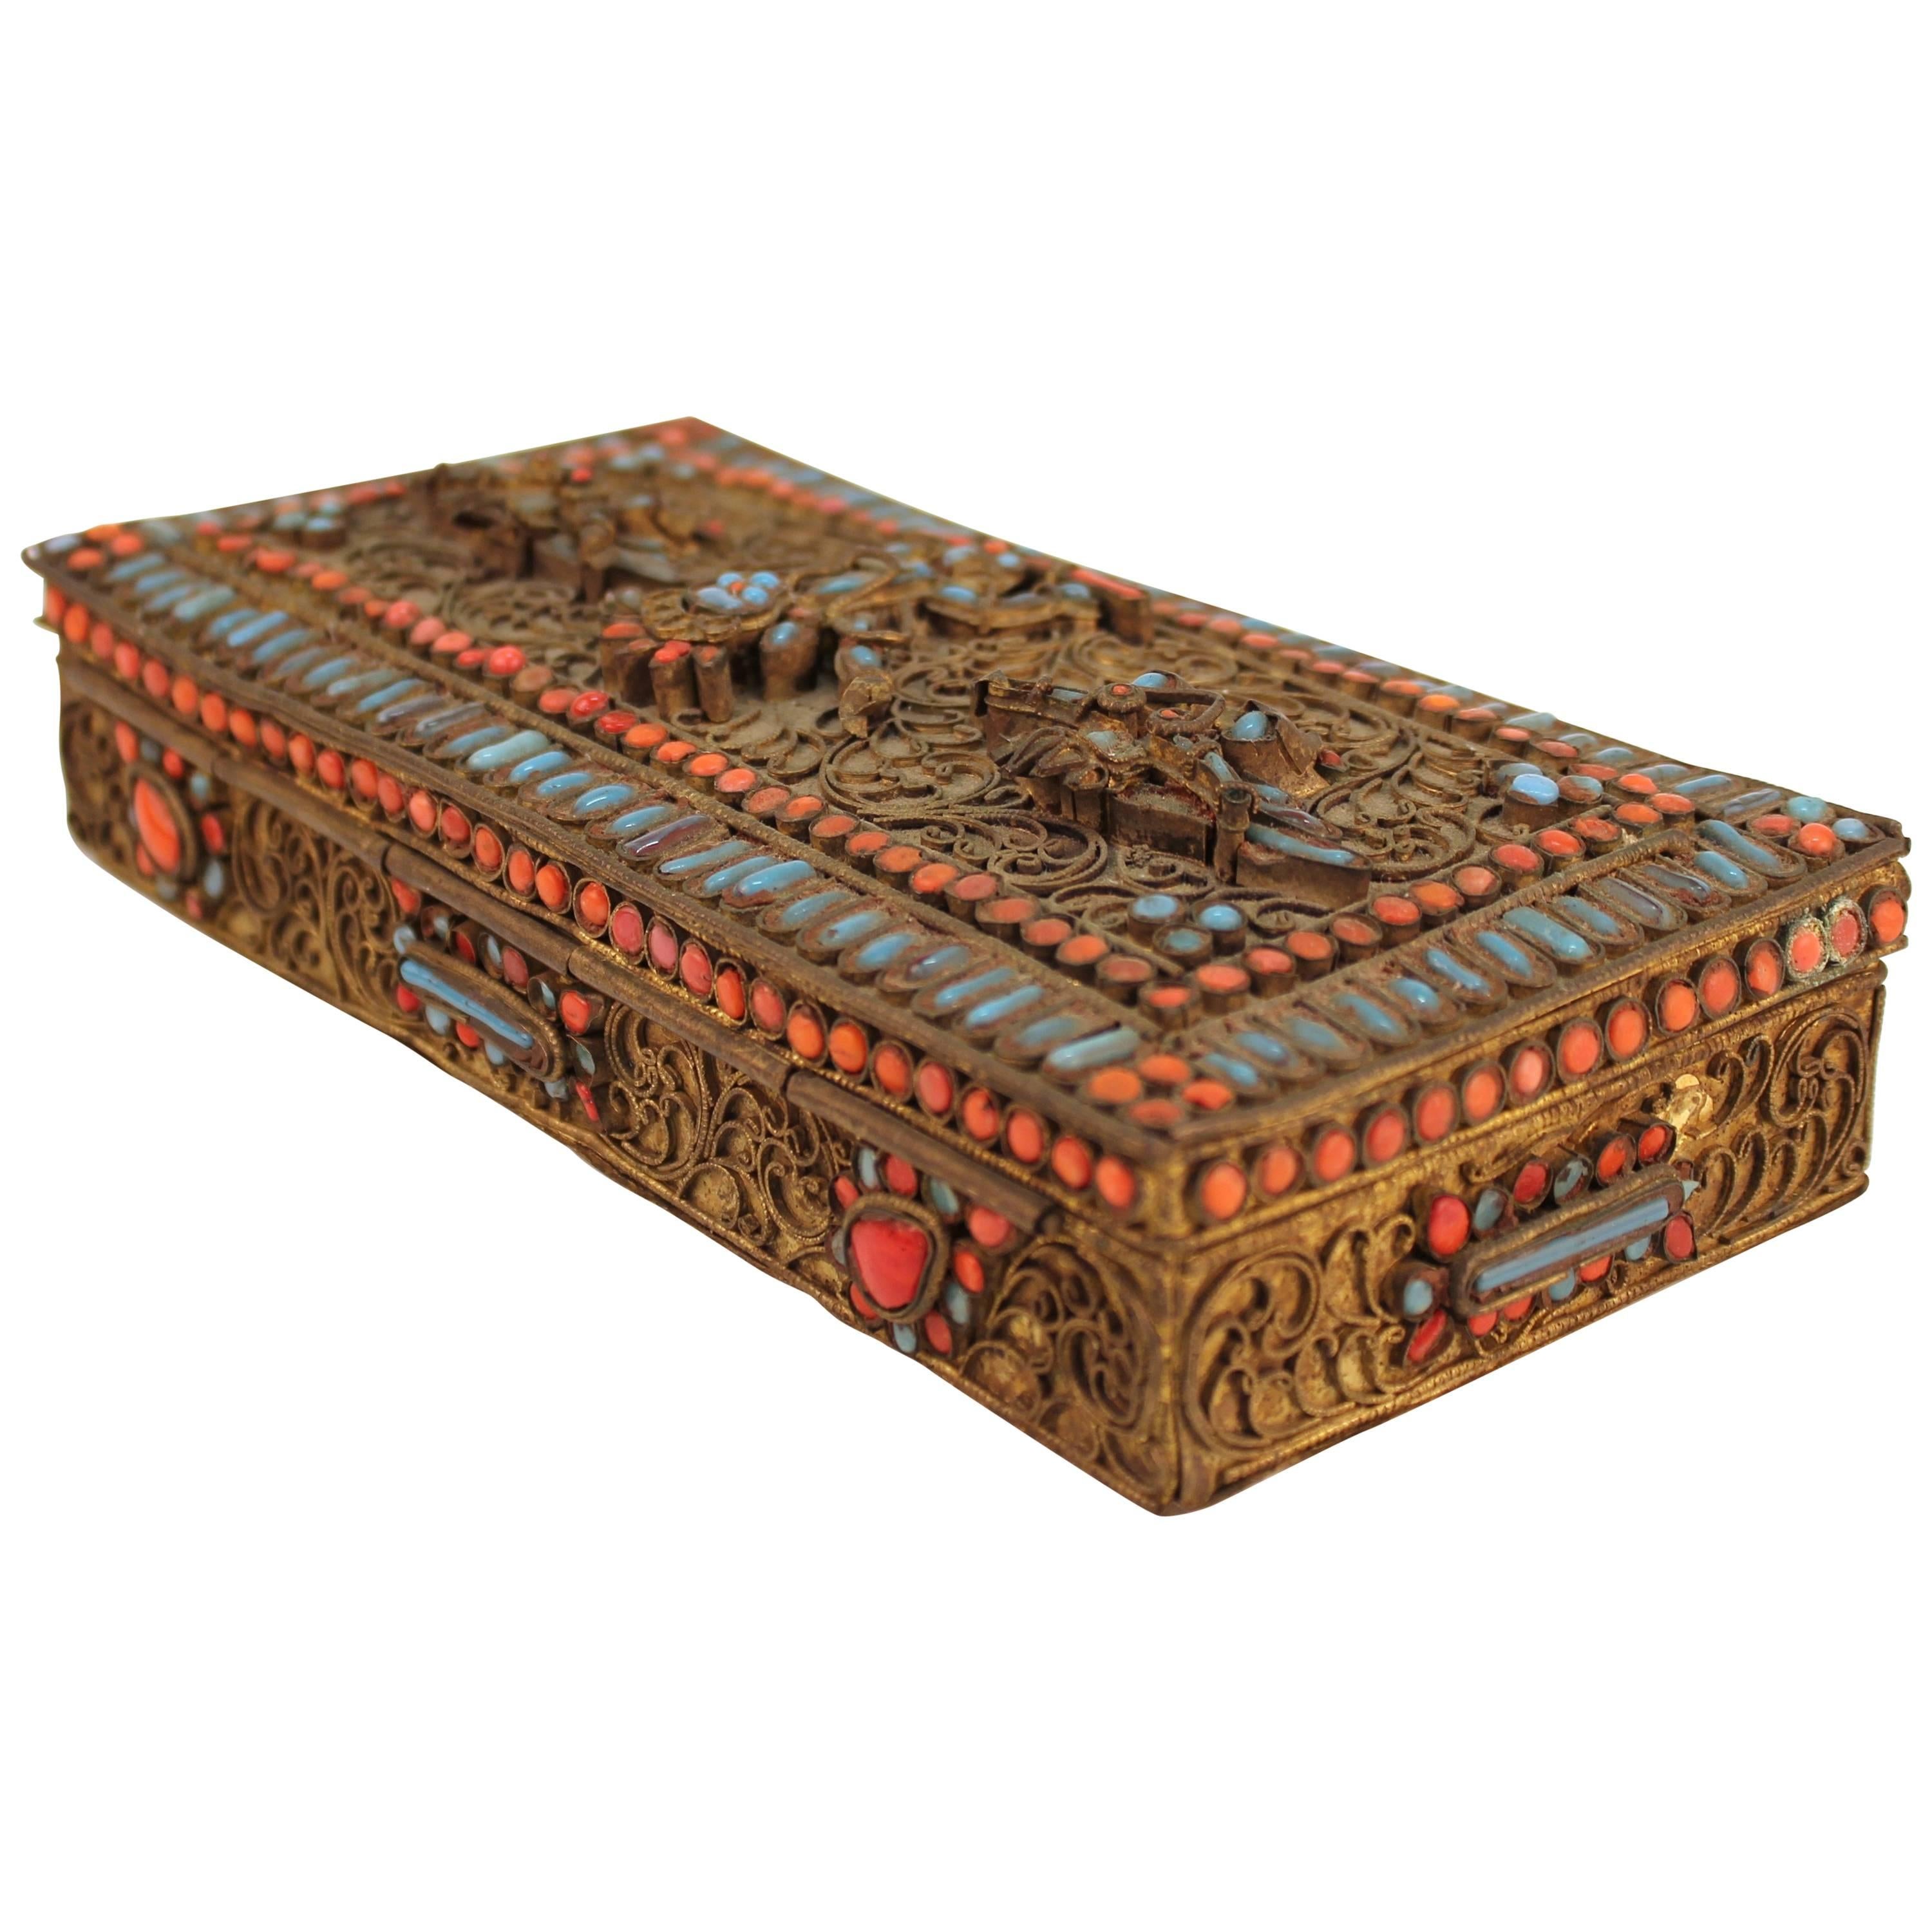 Chinese-Tibetan Filigree Brass Box with Turquoise and Coral